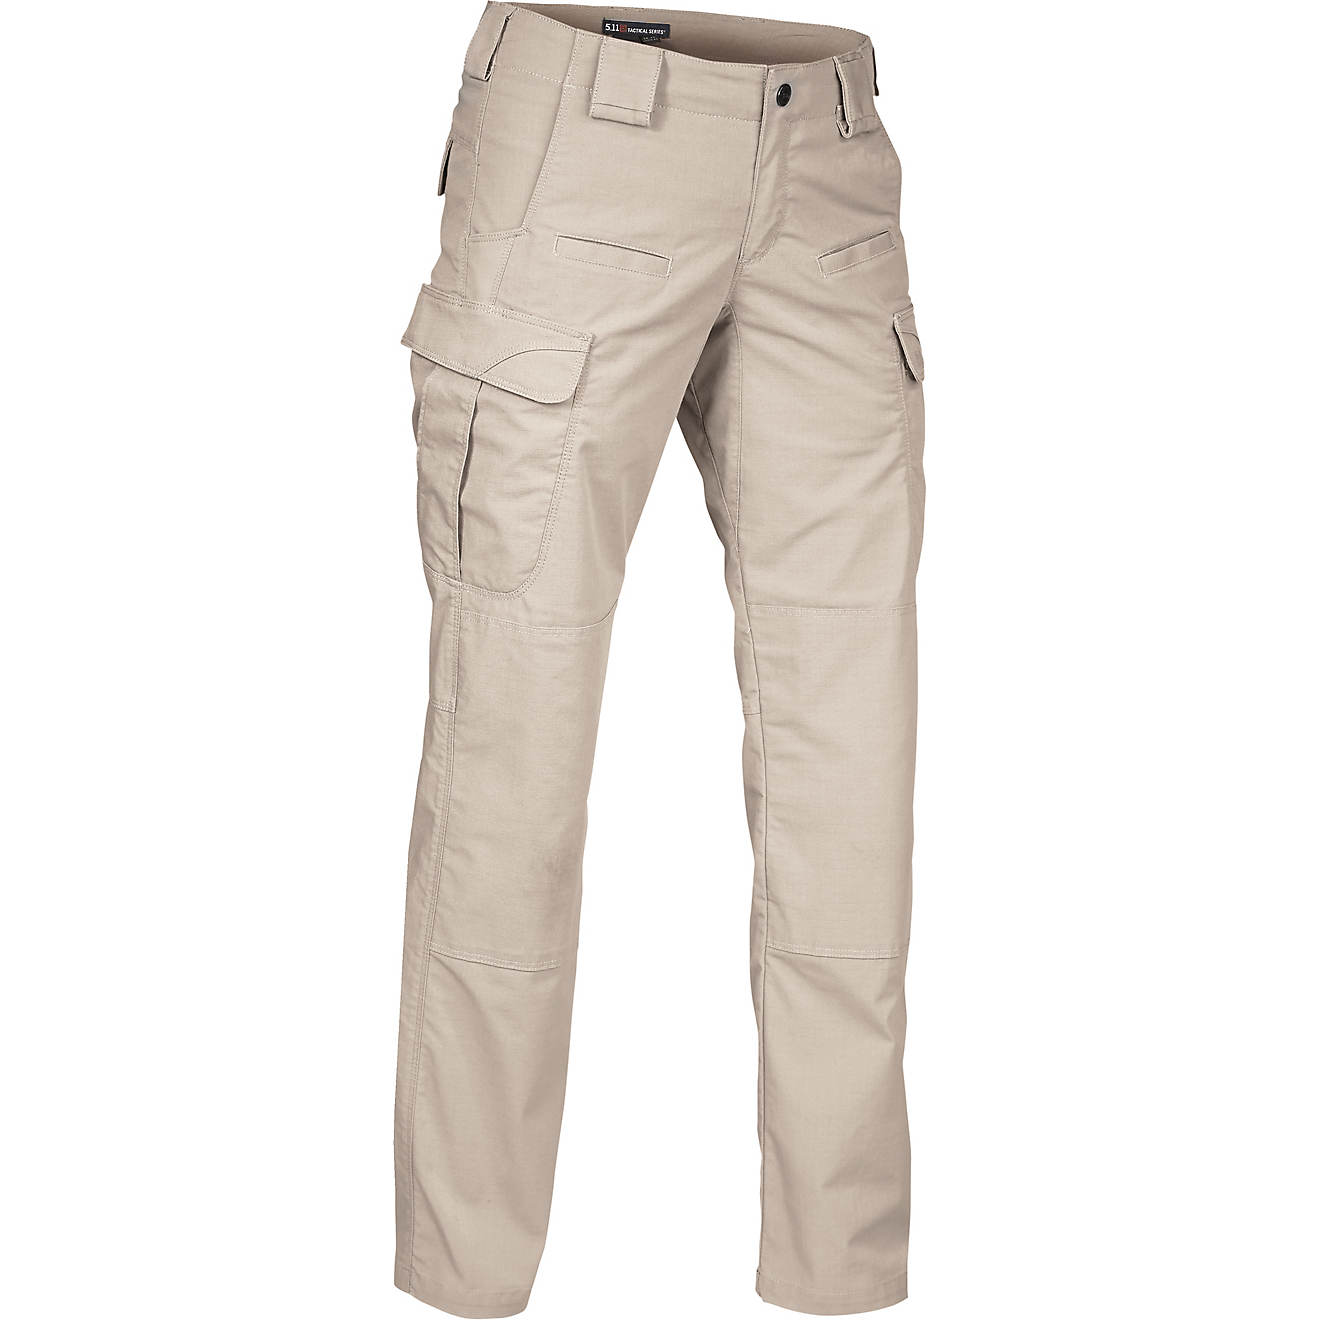 5.11 Tactical Women's Stryke Pant | Academy